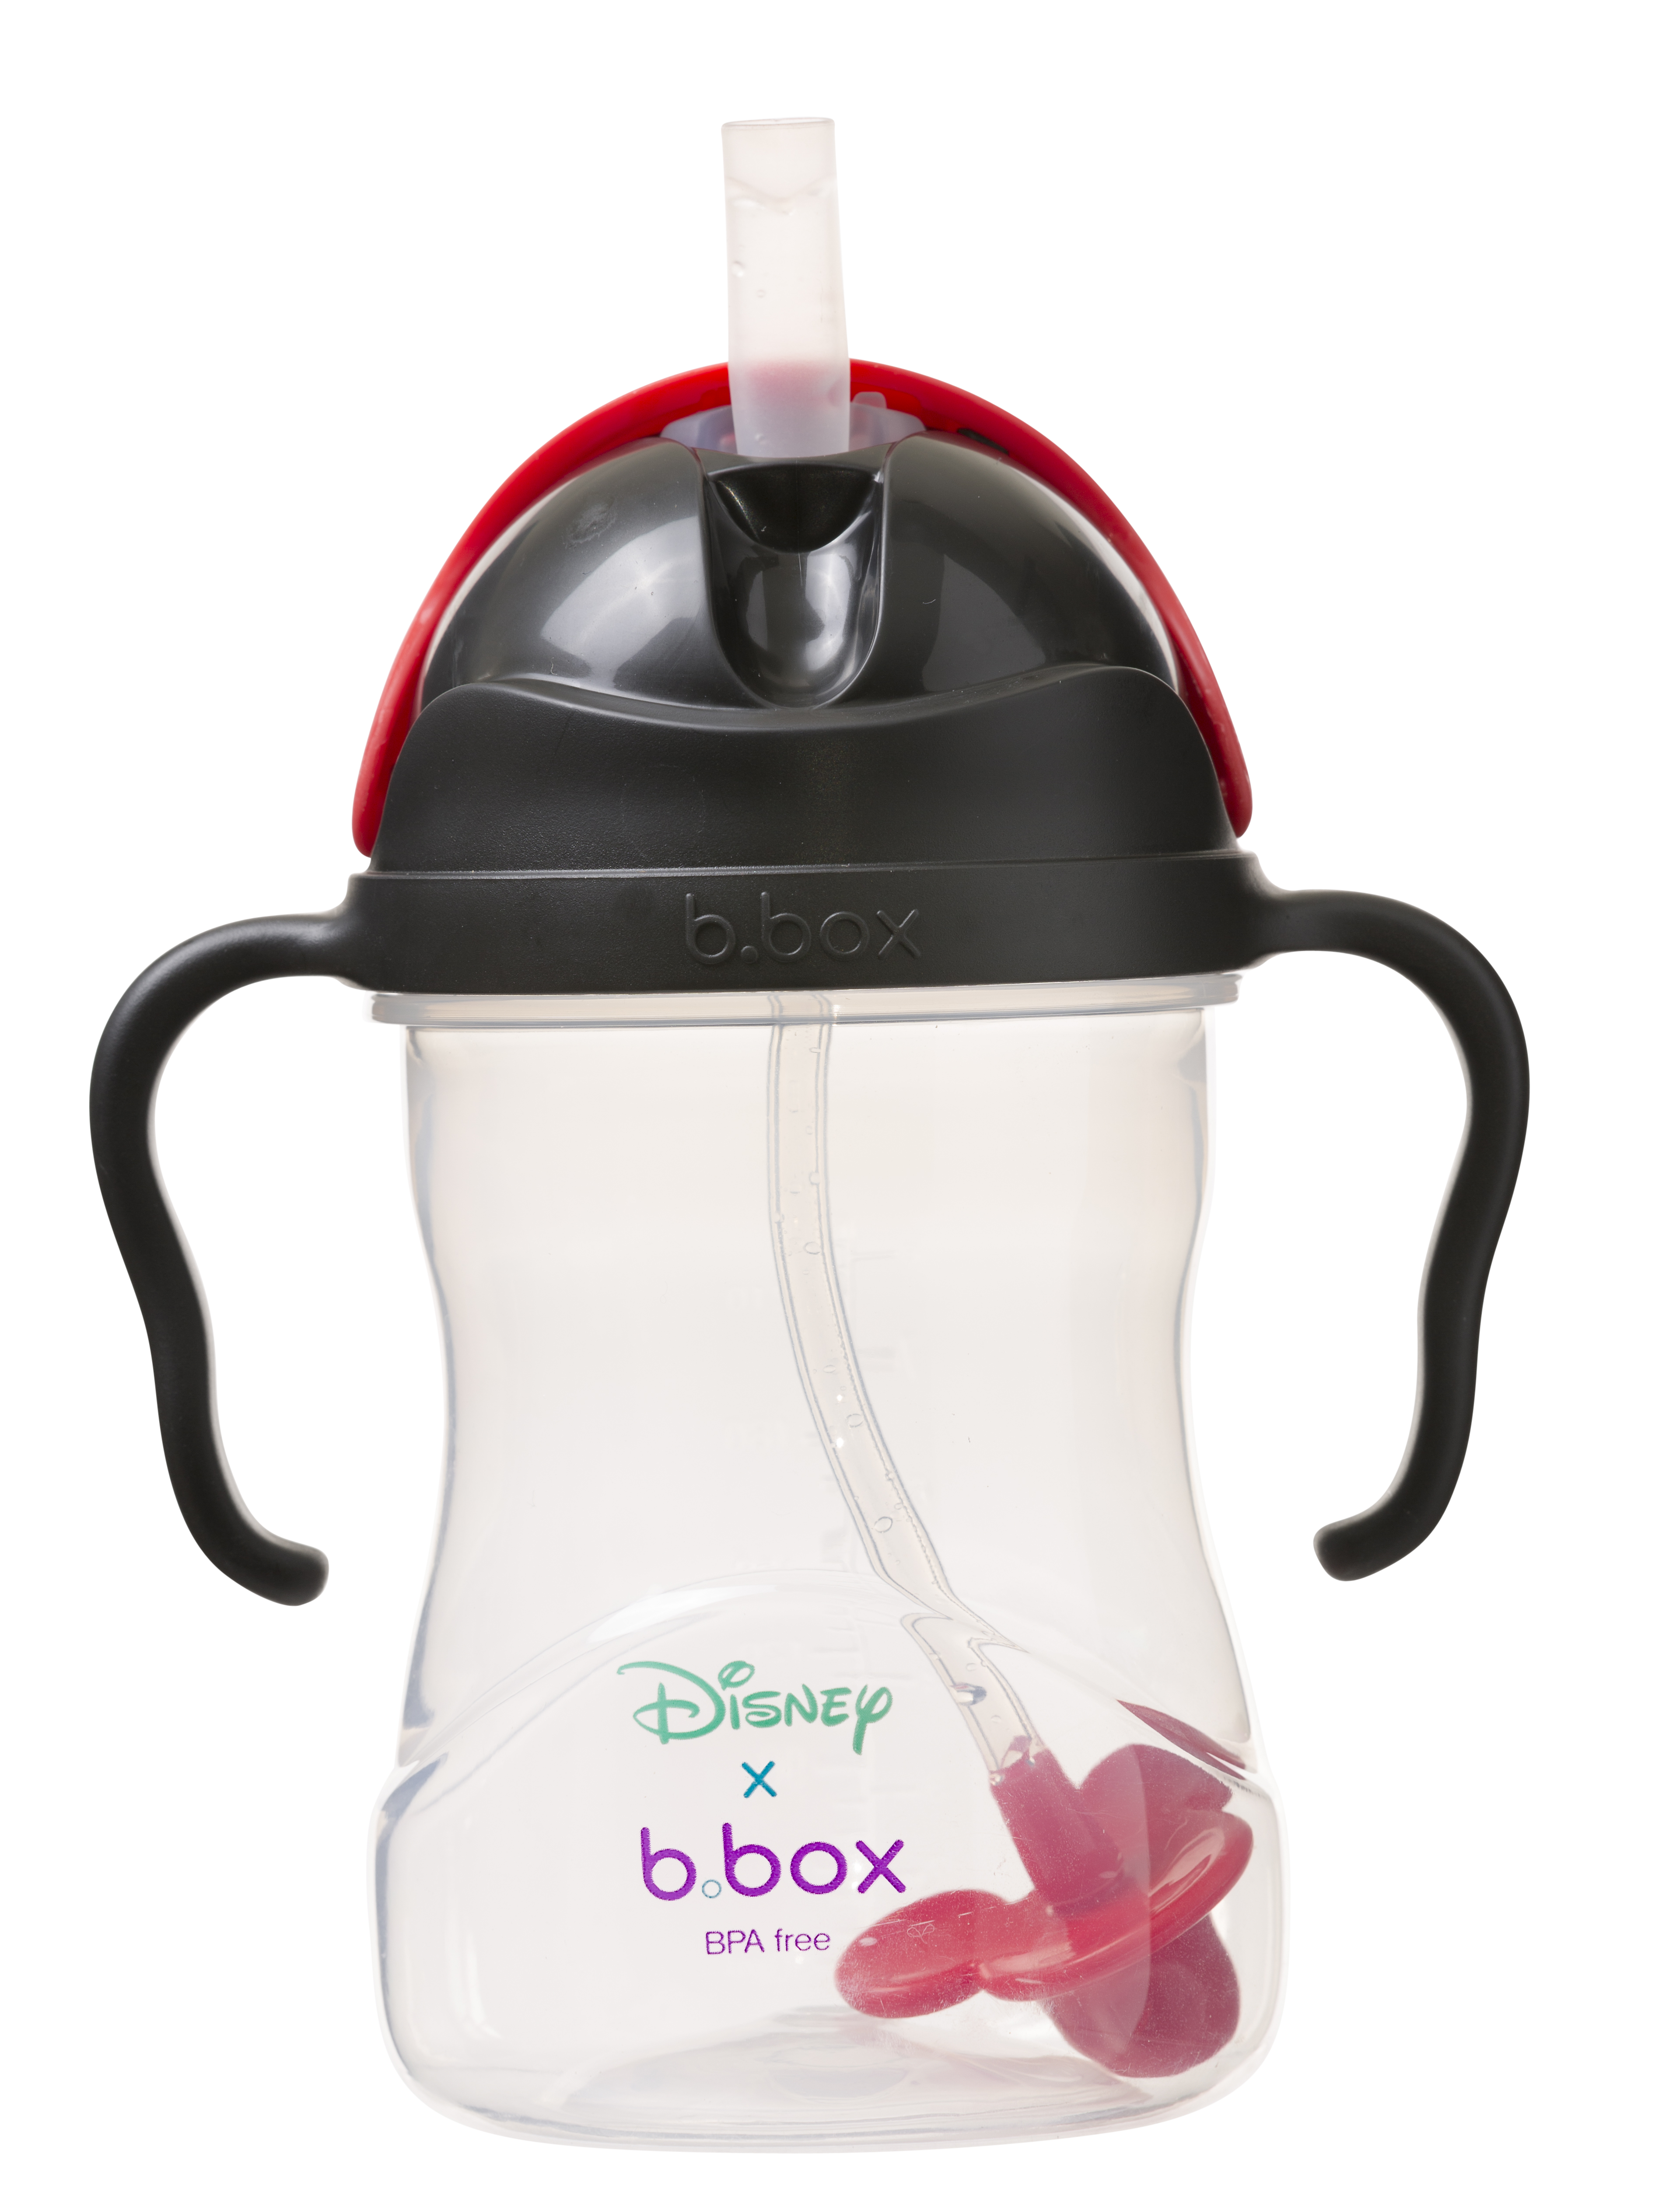 b.box Sippy Cup - Licensed